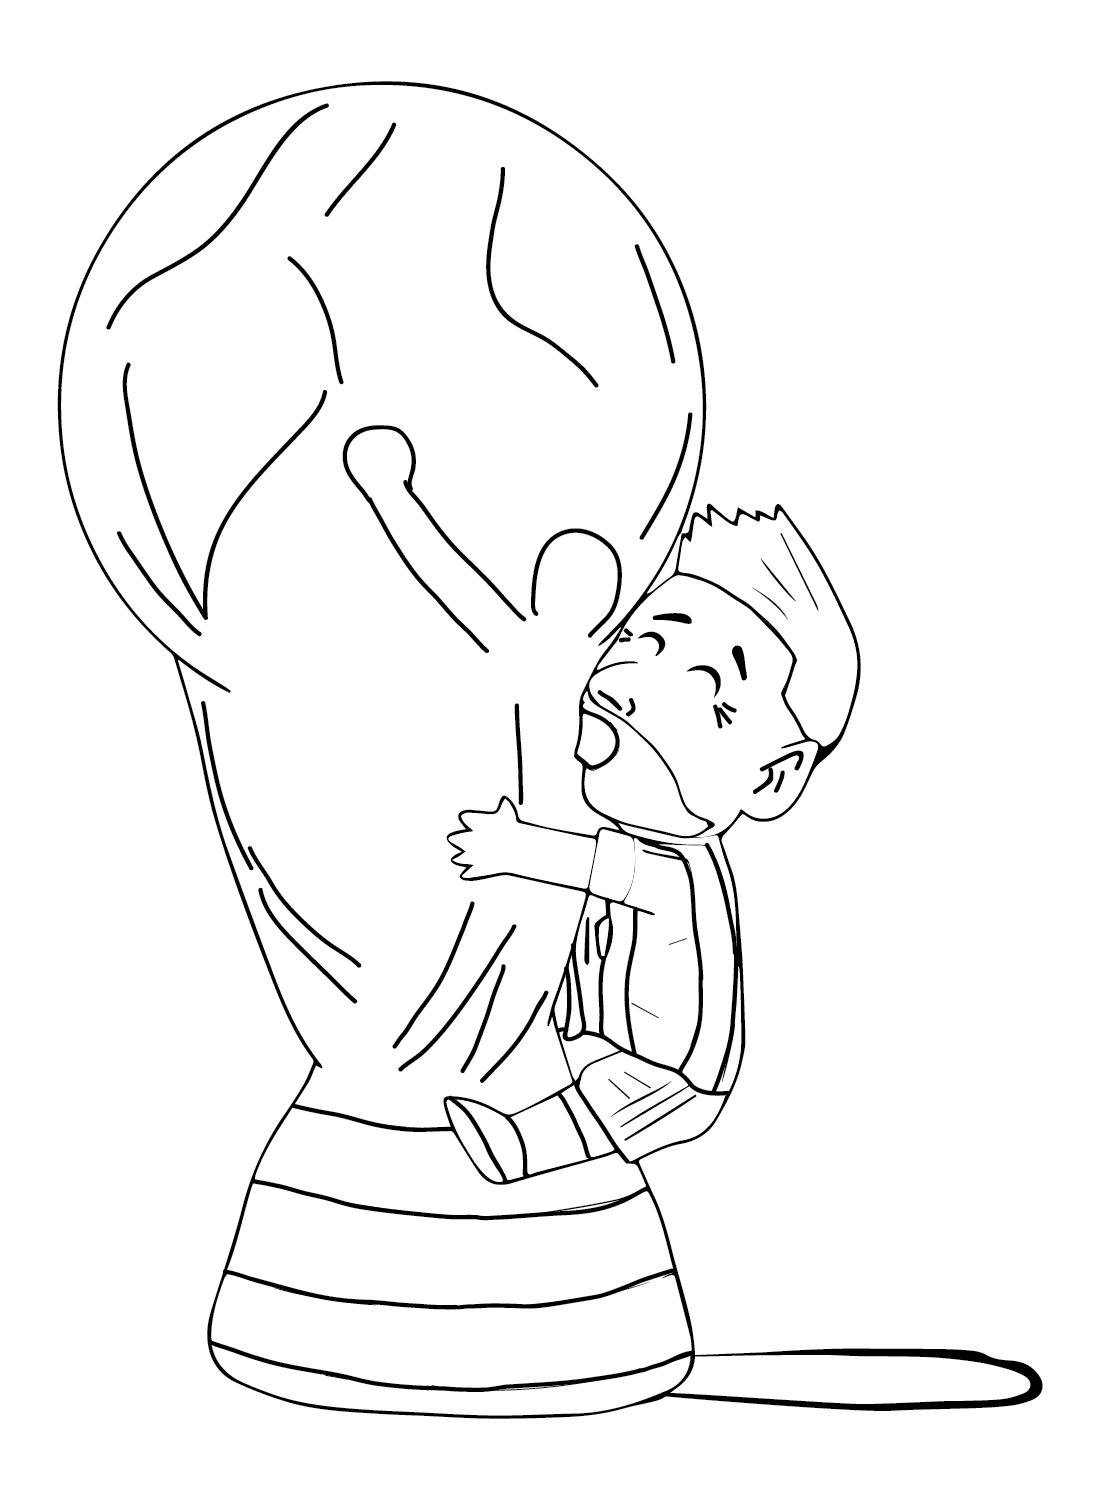 Messi Cute Coloring Page